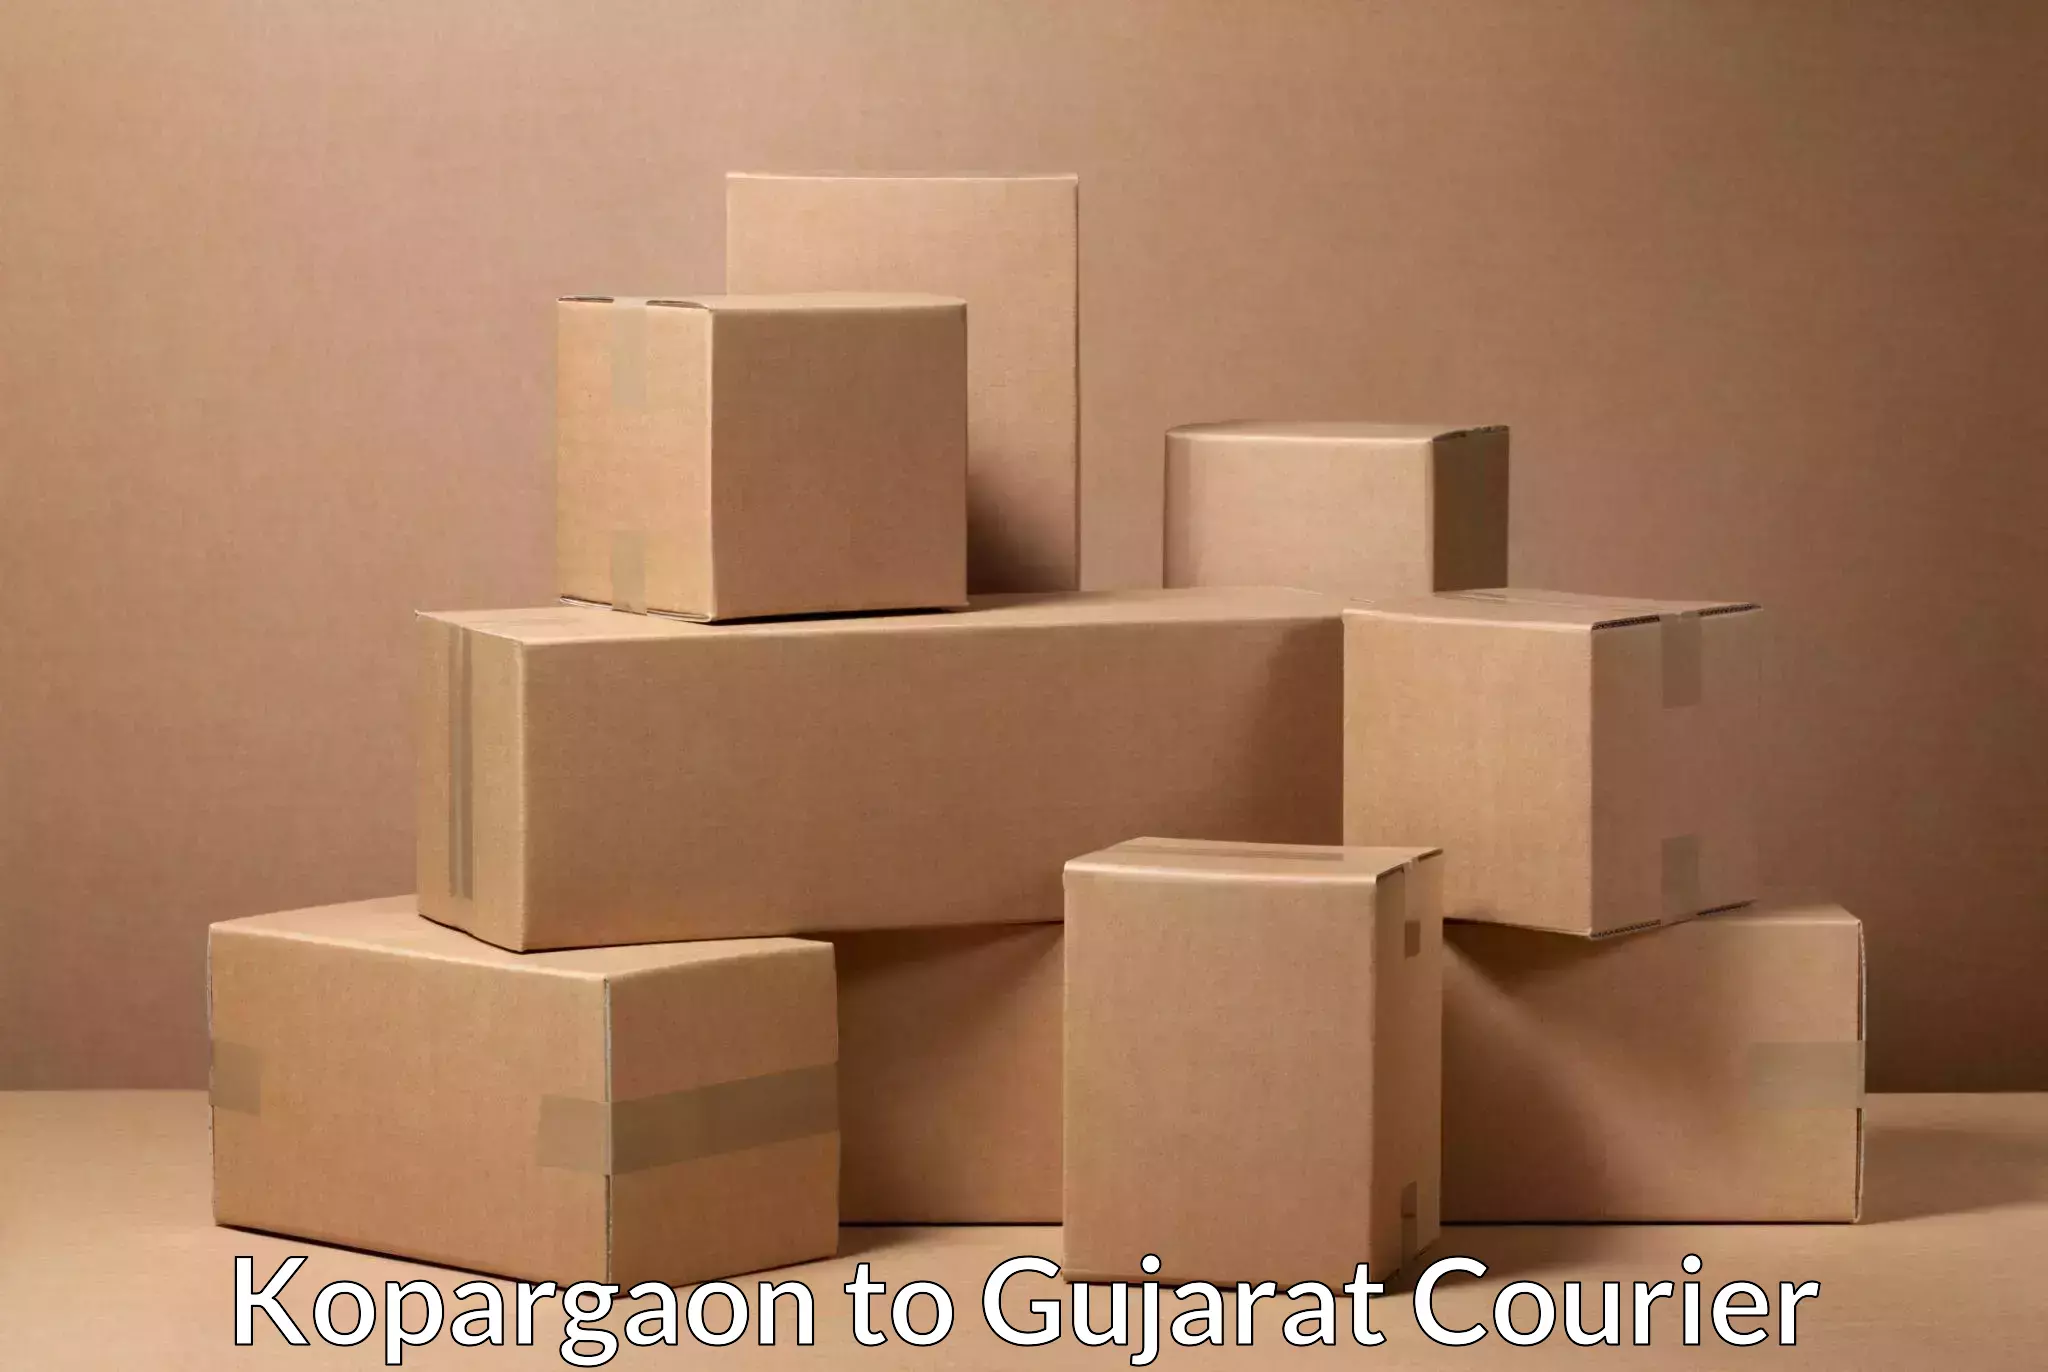 Multi-national courier services Kopargaon to Dholera